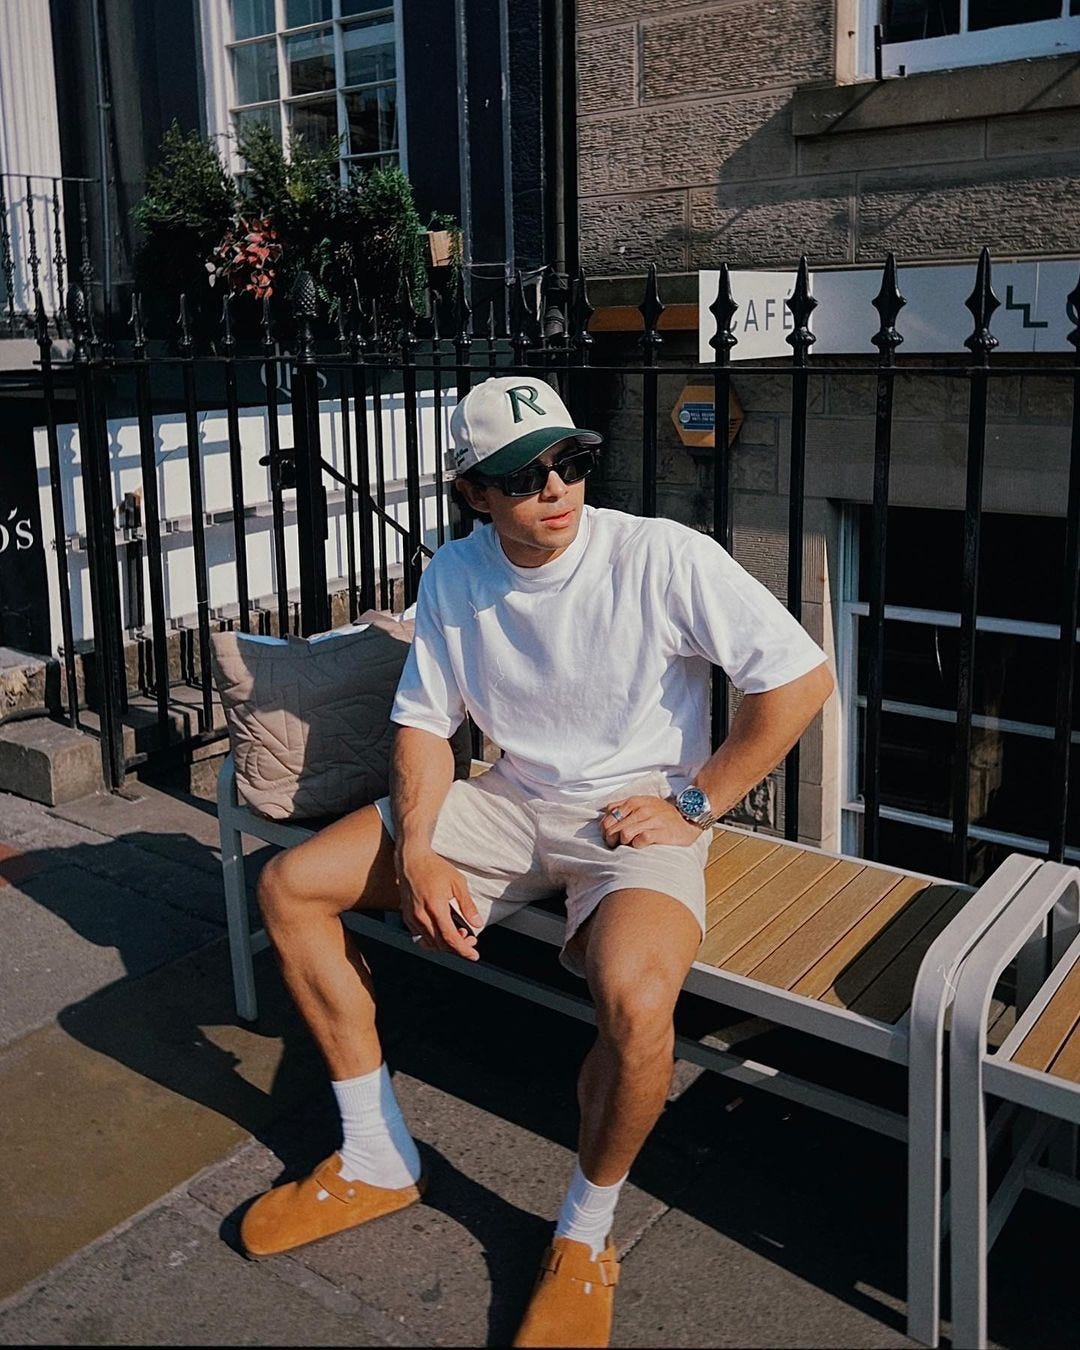 man sitting on a bench outside wearing a baseball hat, white t-shirt, shorts, and tall socks with birkenstock clogs